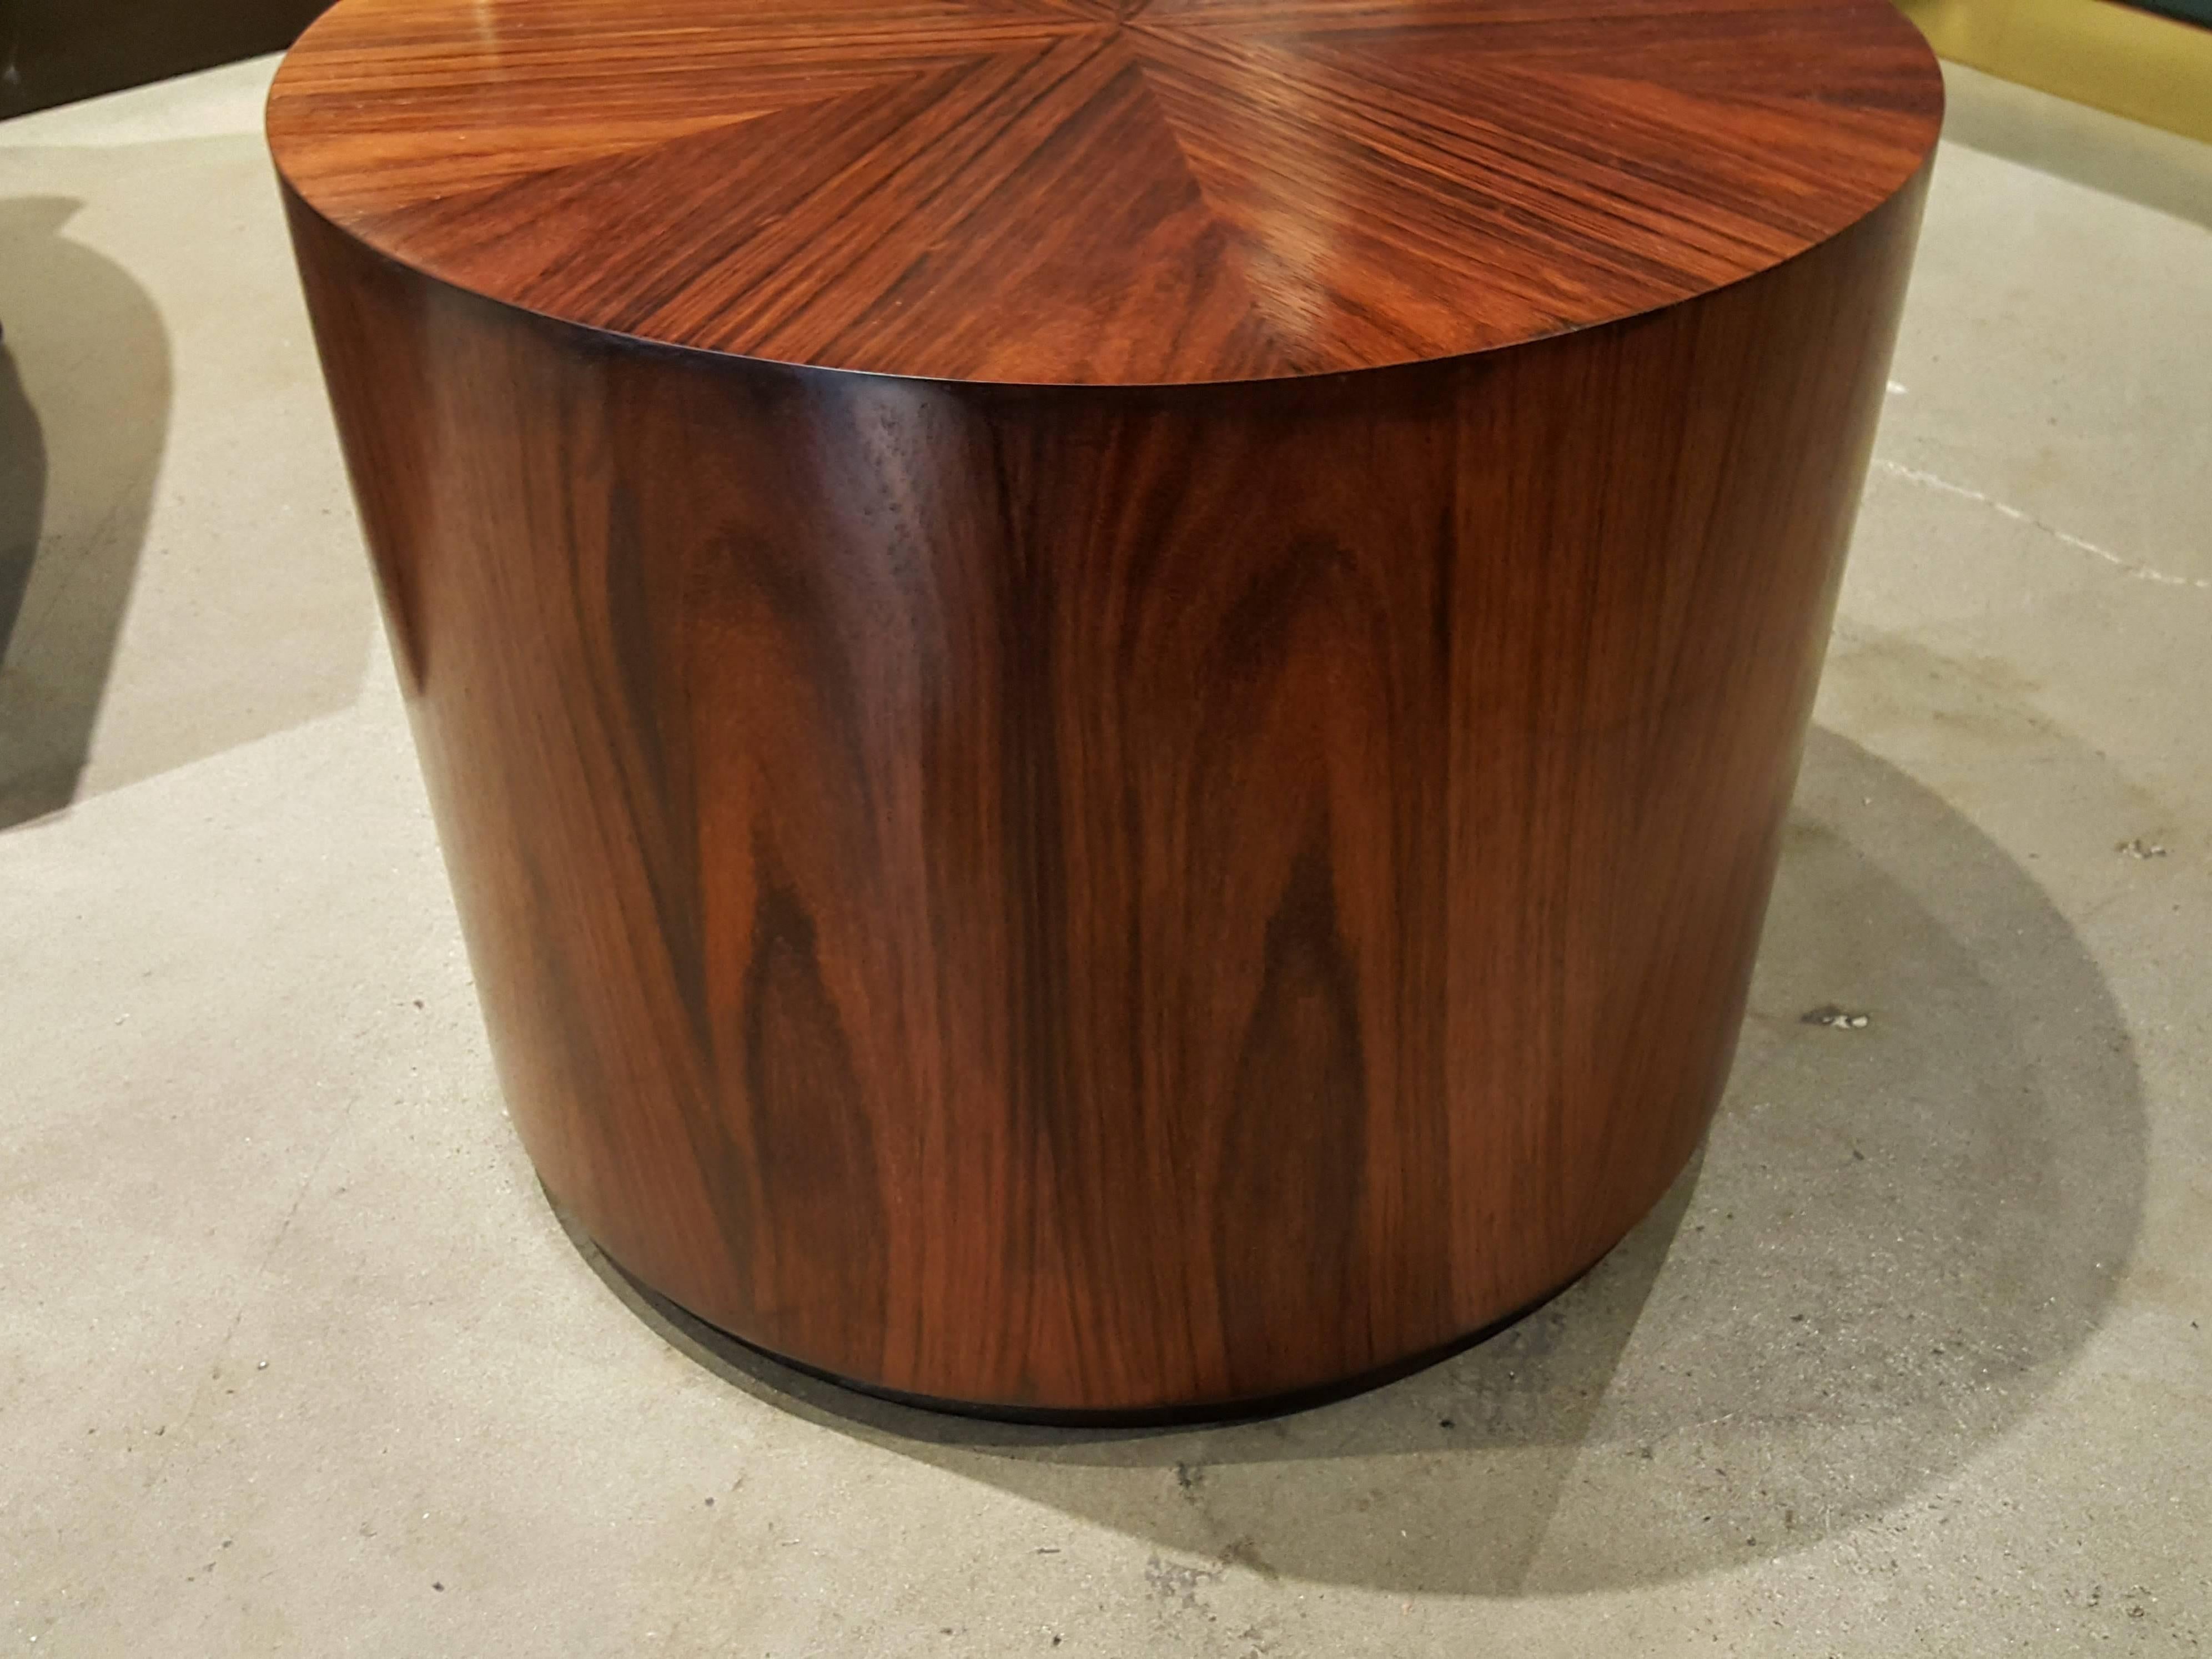 American Dramatic Rosewood Drum Side Table by Harvey Probber, 1960s, Fully Restored